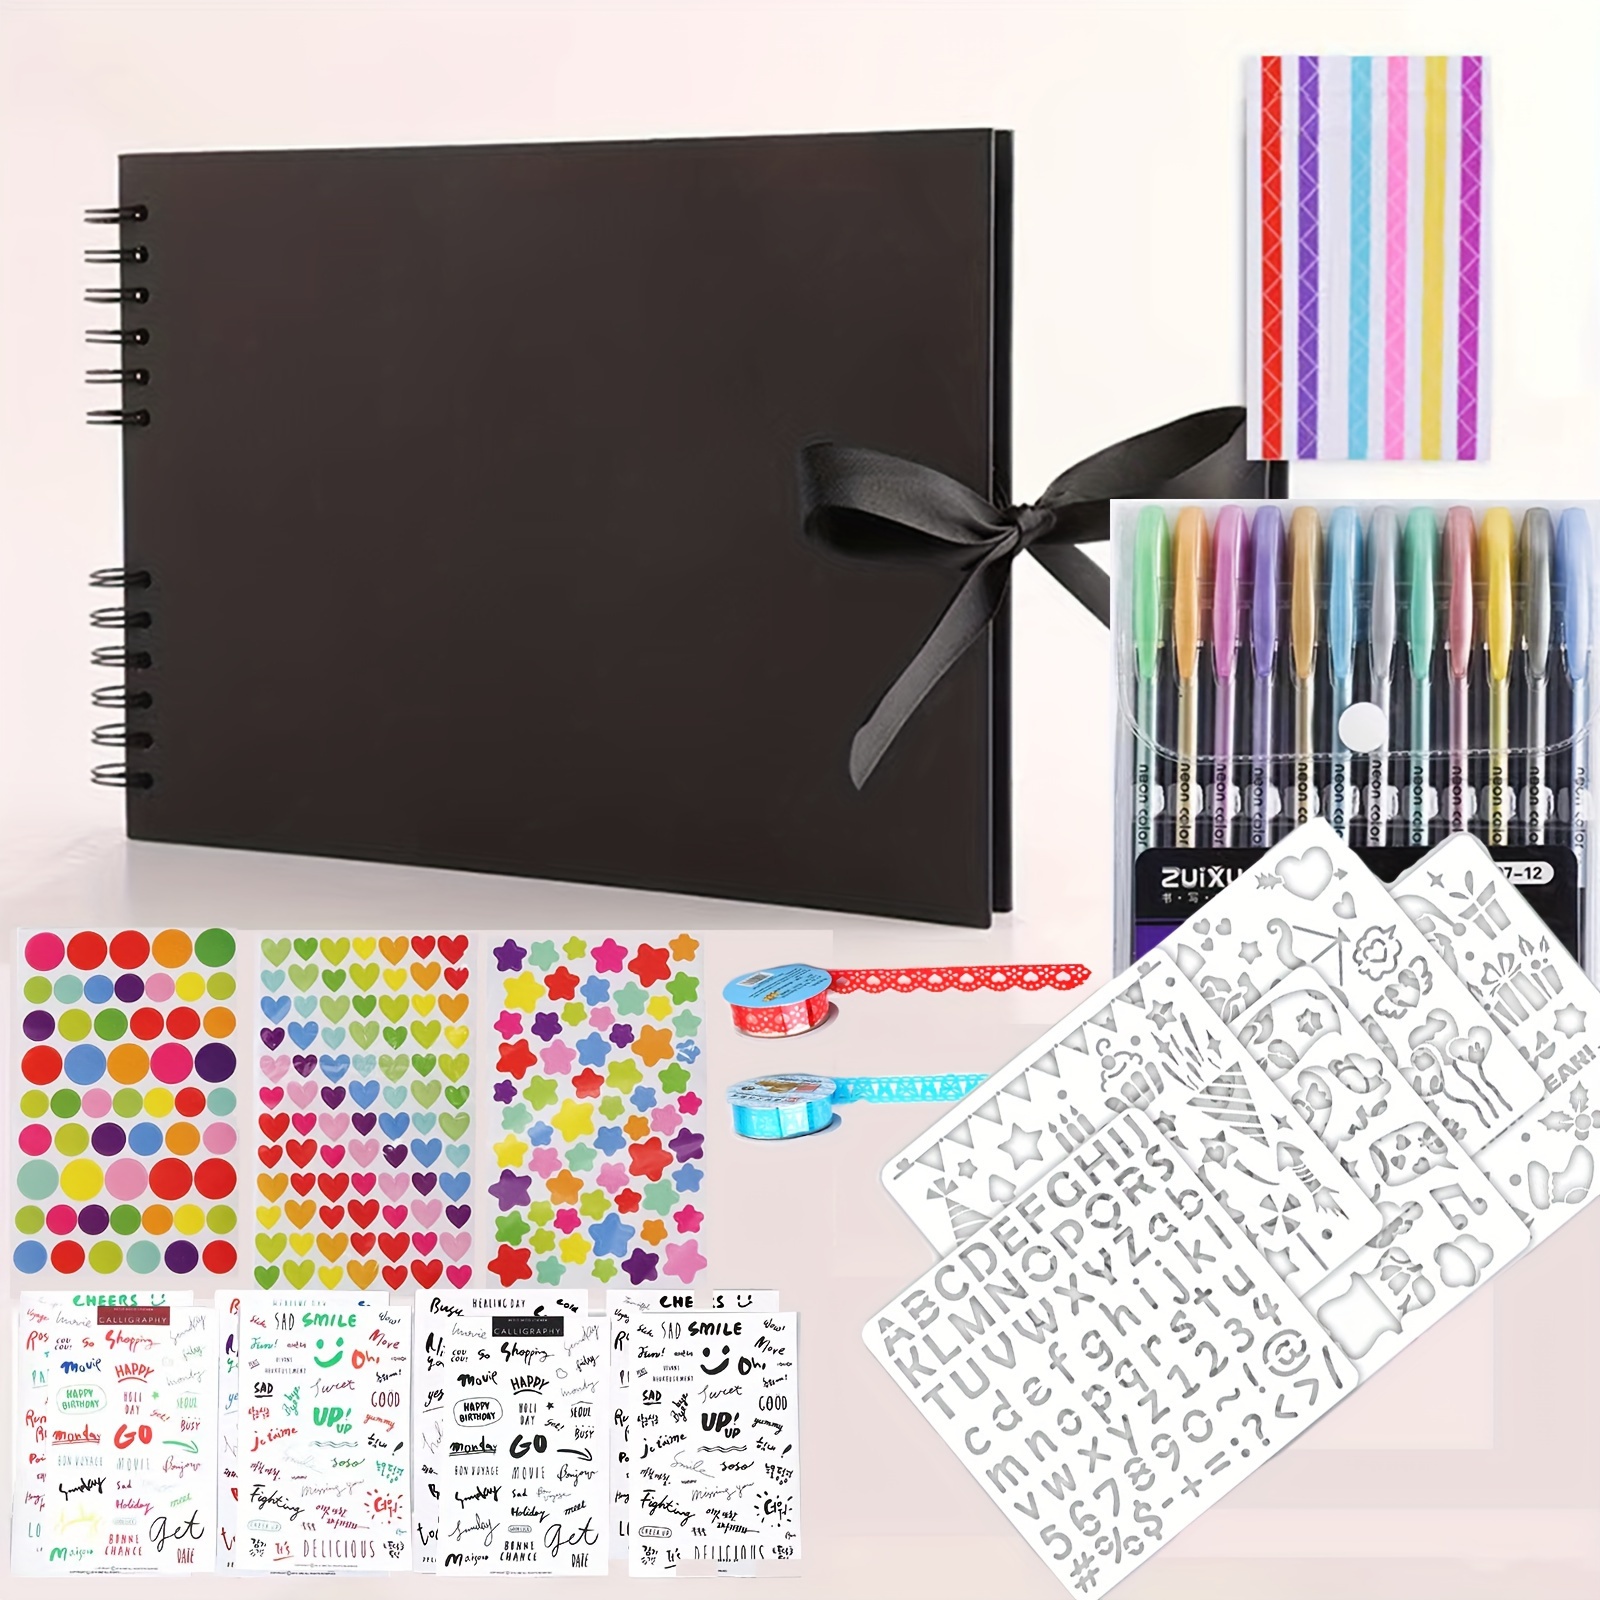 

80 Pages Scrapbook Album With 12 Metallic Markers, Craft Paper Photo Album For Wedding And Anniversary, Family Diy Scrapbook Accessories With Stickers Corners(black)